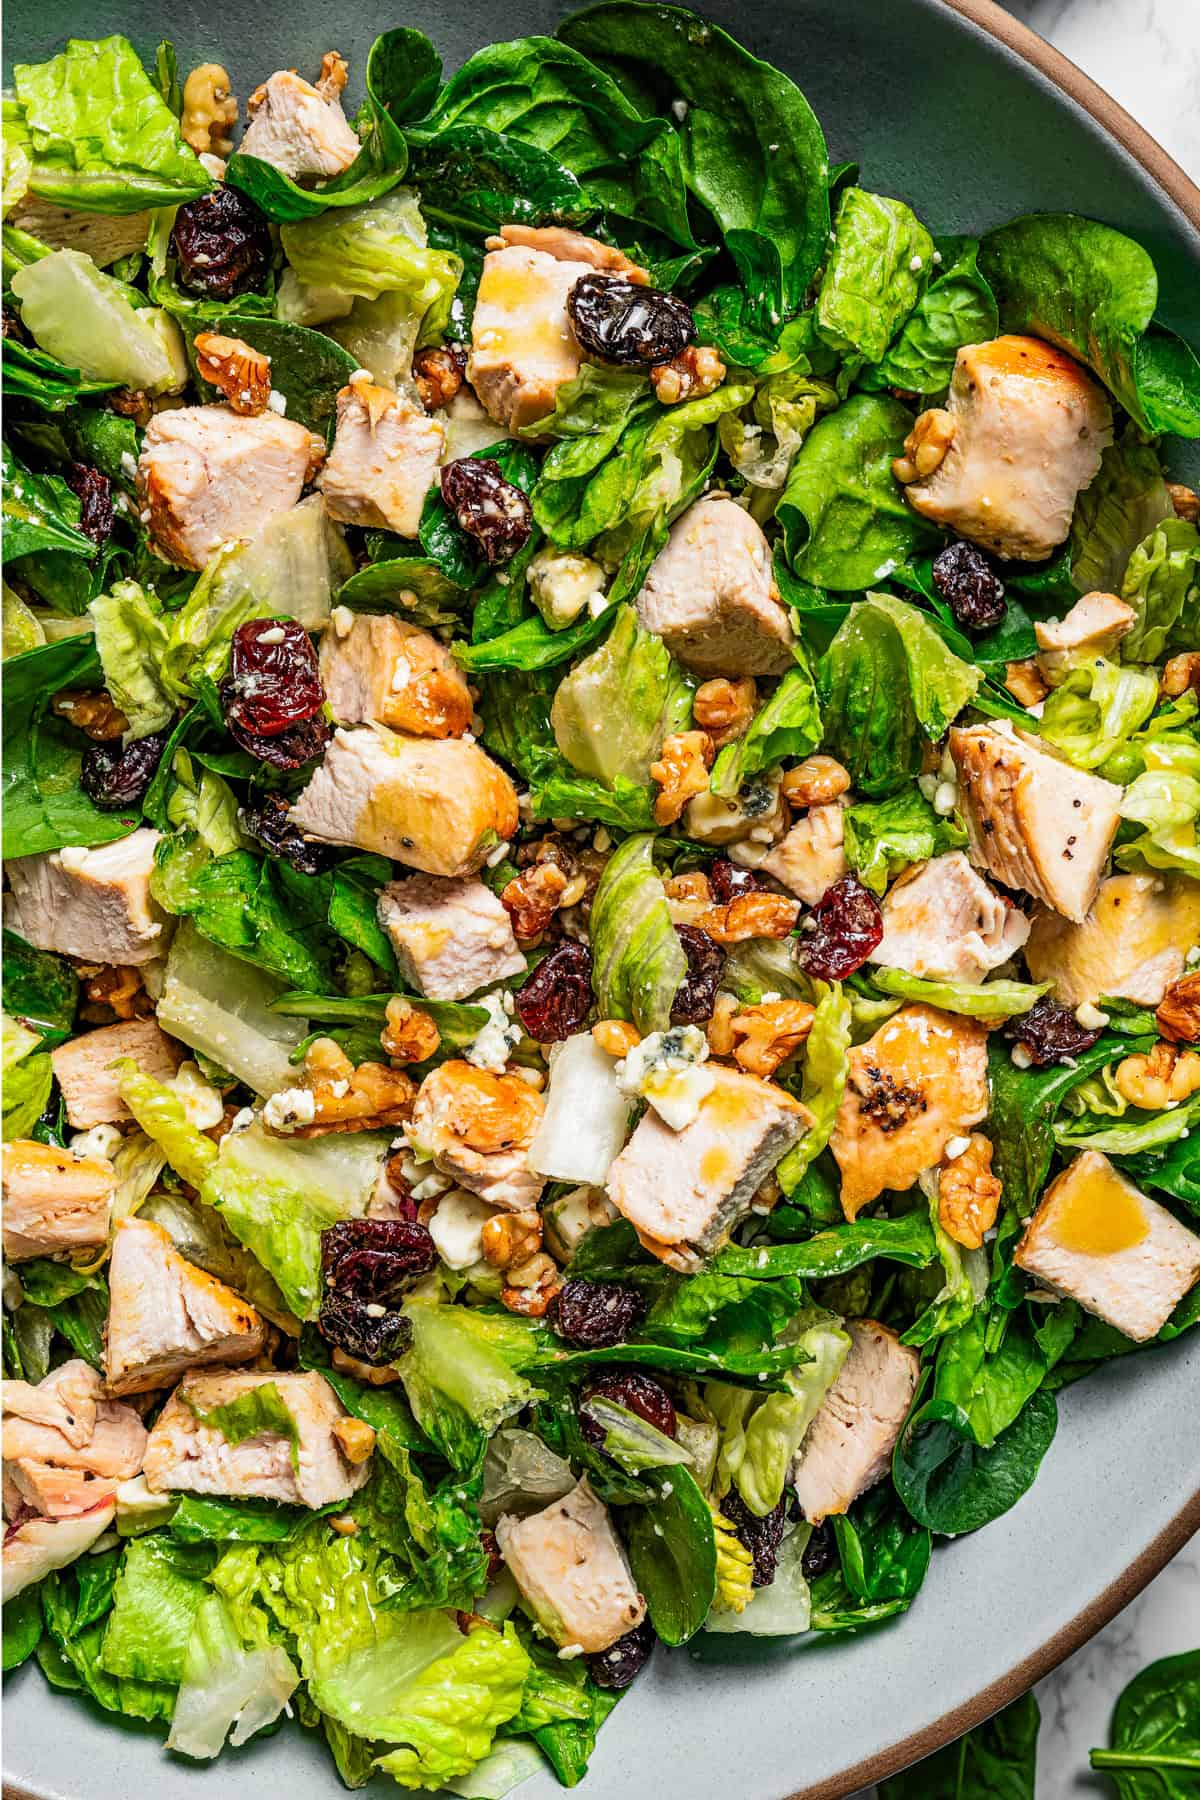 Walnut and cherry chicken salad in a large blue salad bowl.